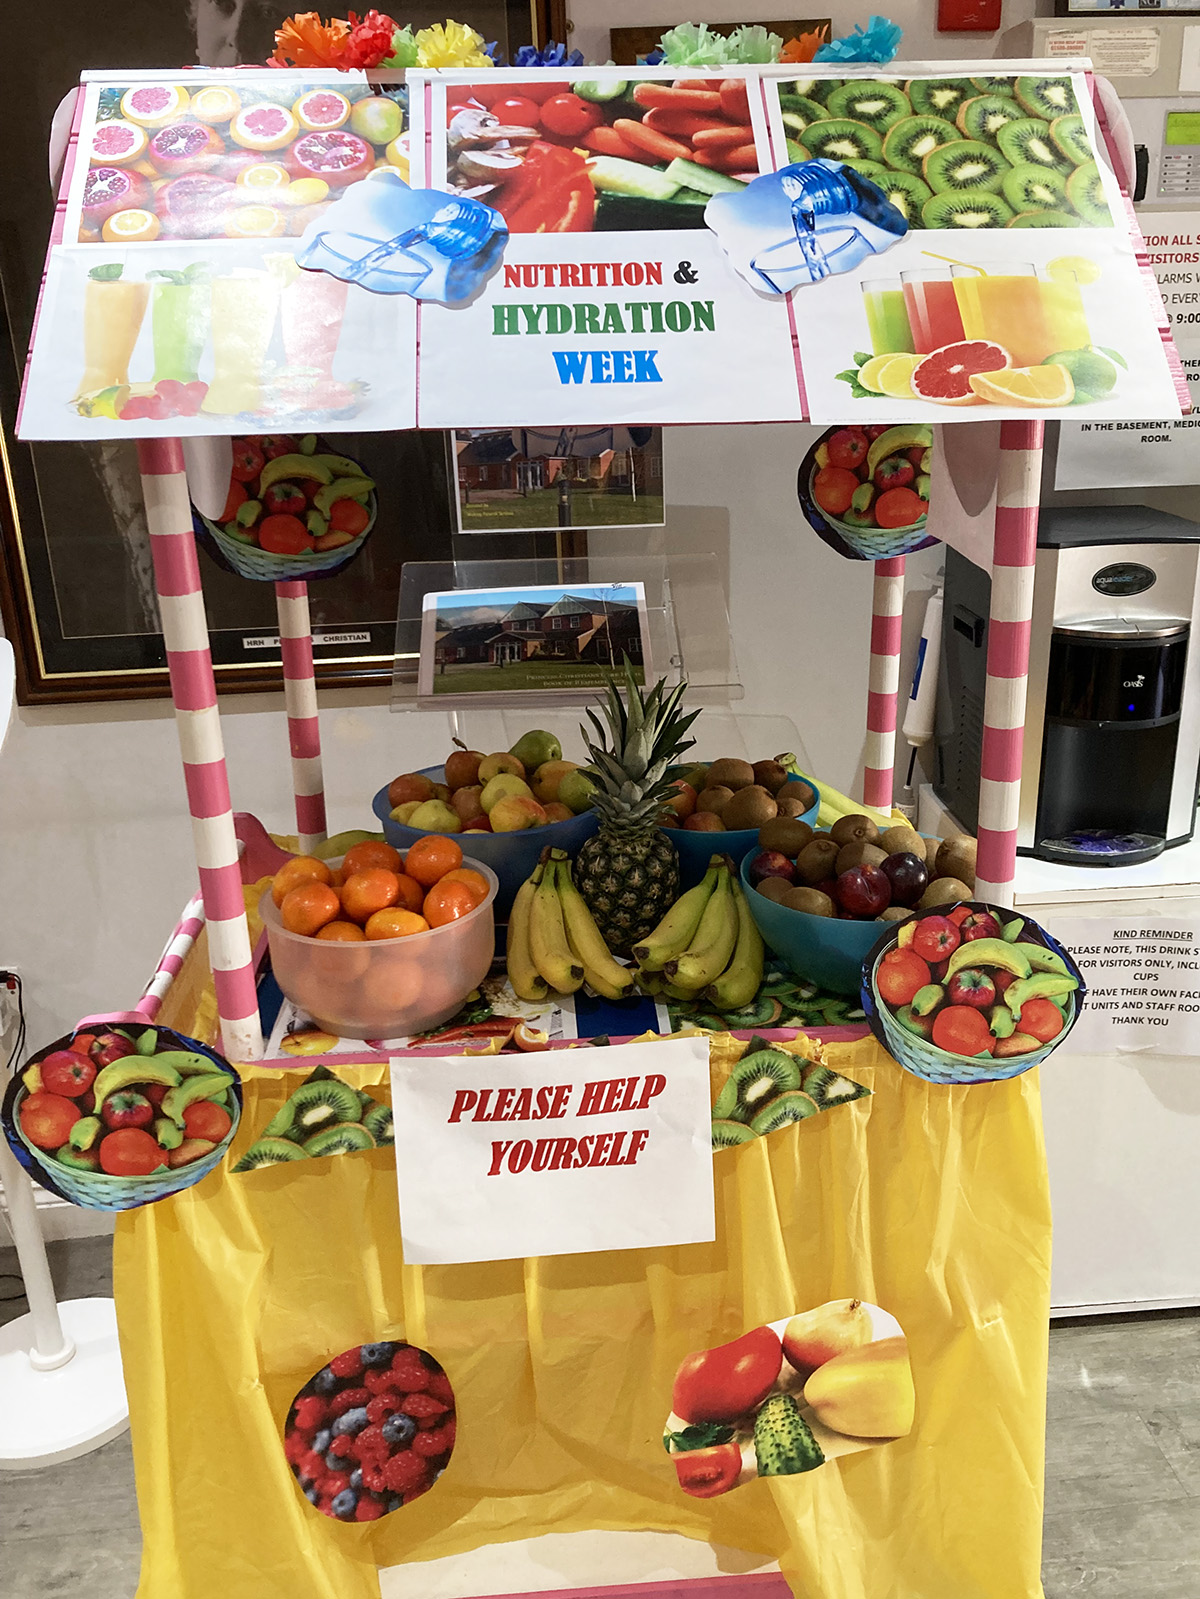 Colourful fruit trolley at Princess Christian Care Home for Nutrition and Hydration Week